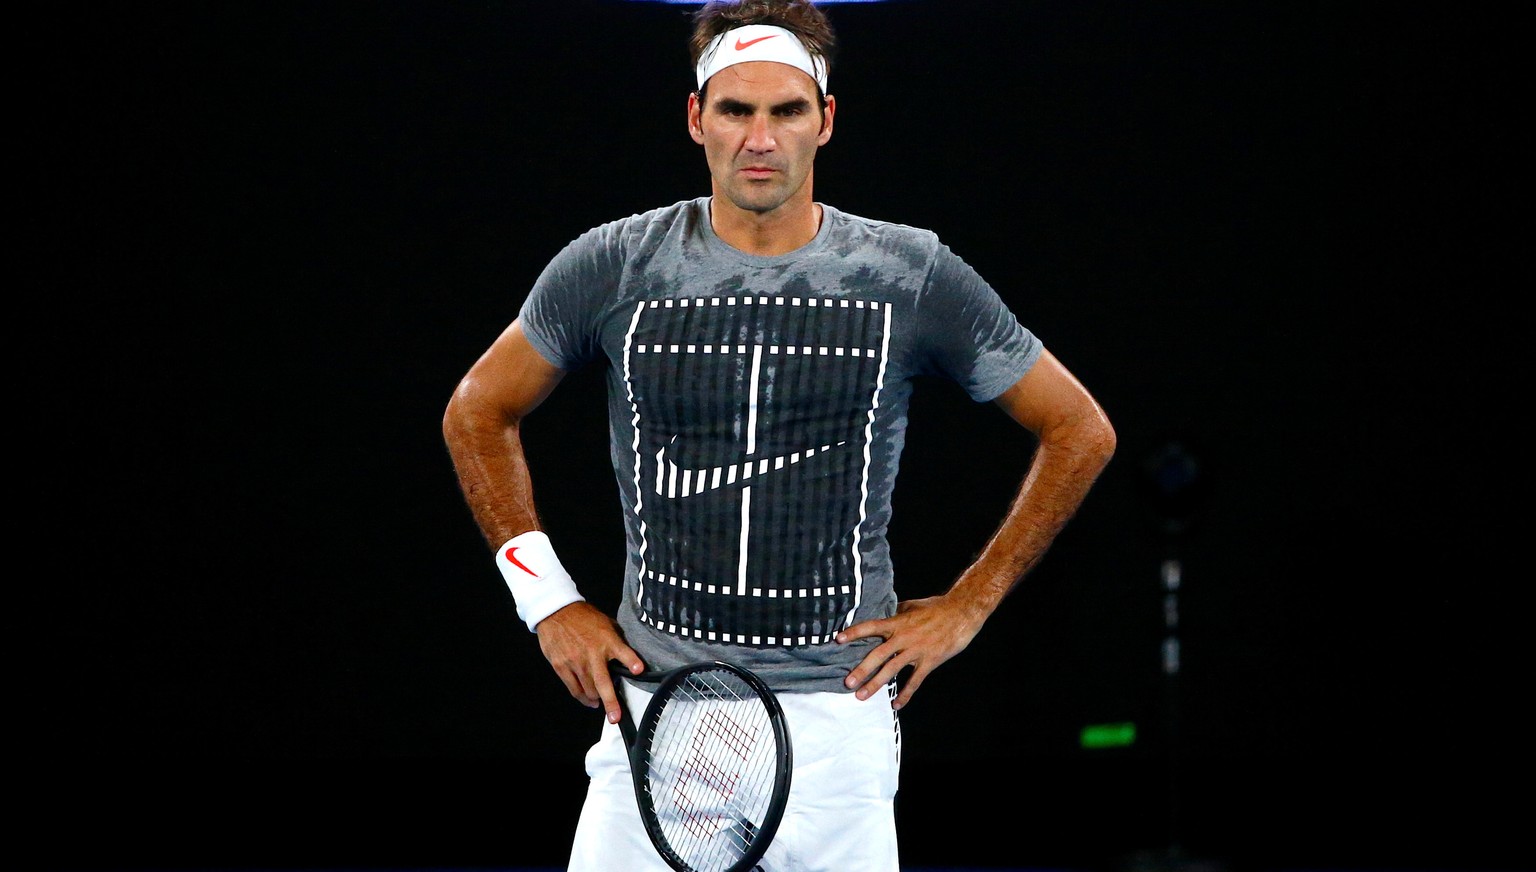 Switzerland&#039;s Roger Federer reacts during a training session ahead of the Australian Open tennis tournament in Melbourne, Australia, January 13, 2017. REUTERS/David Gray